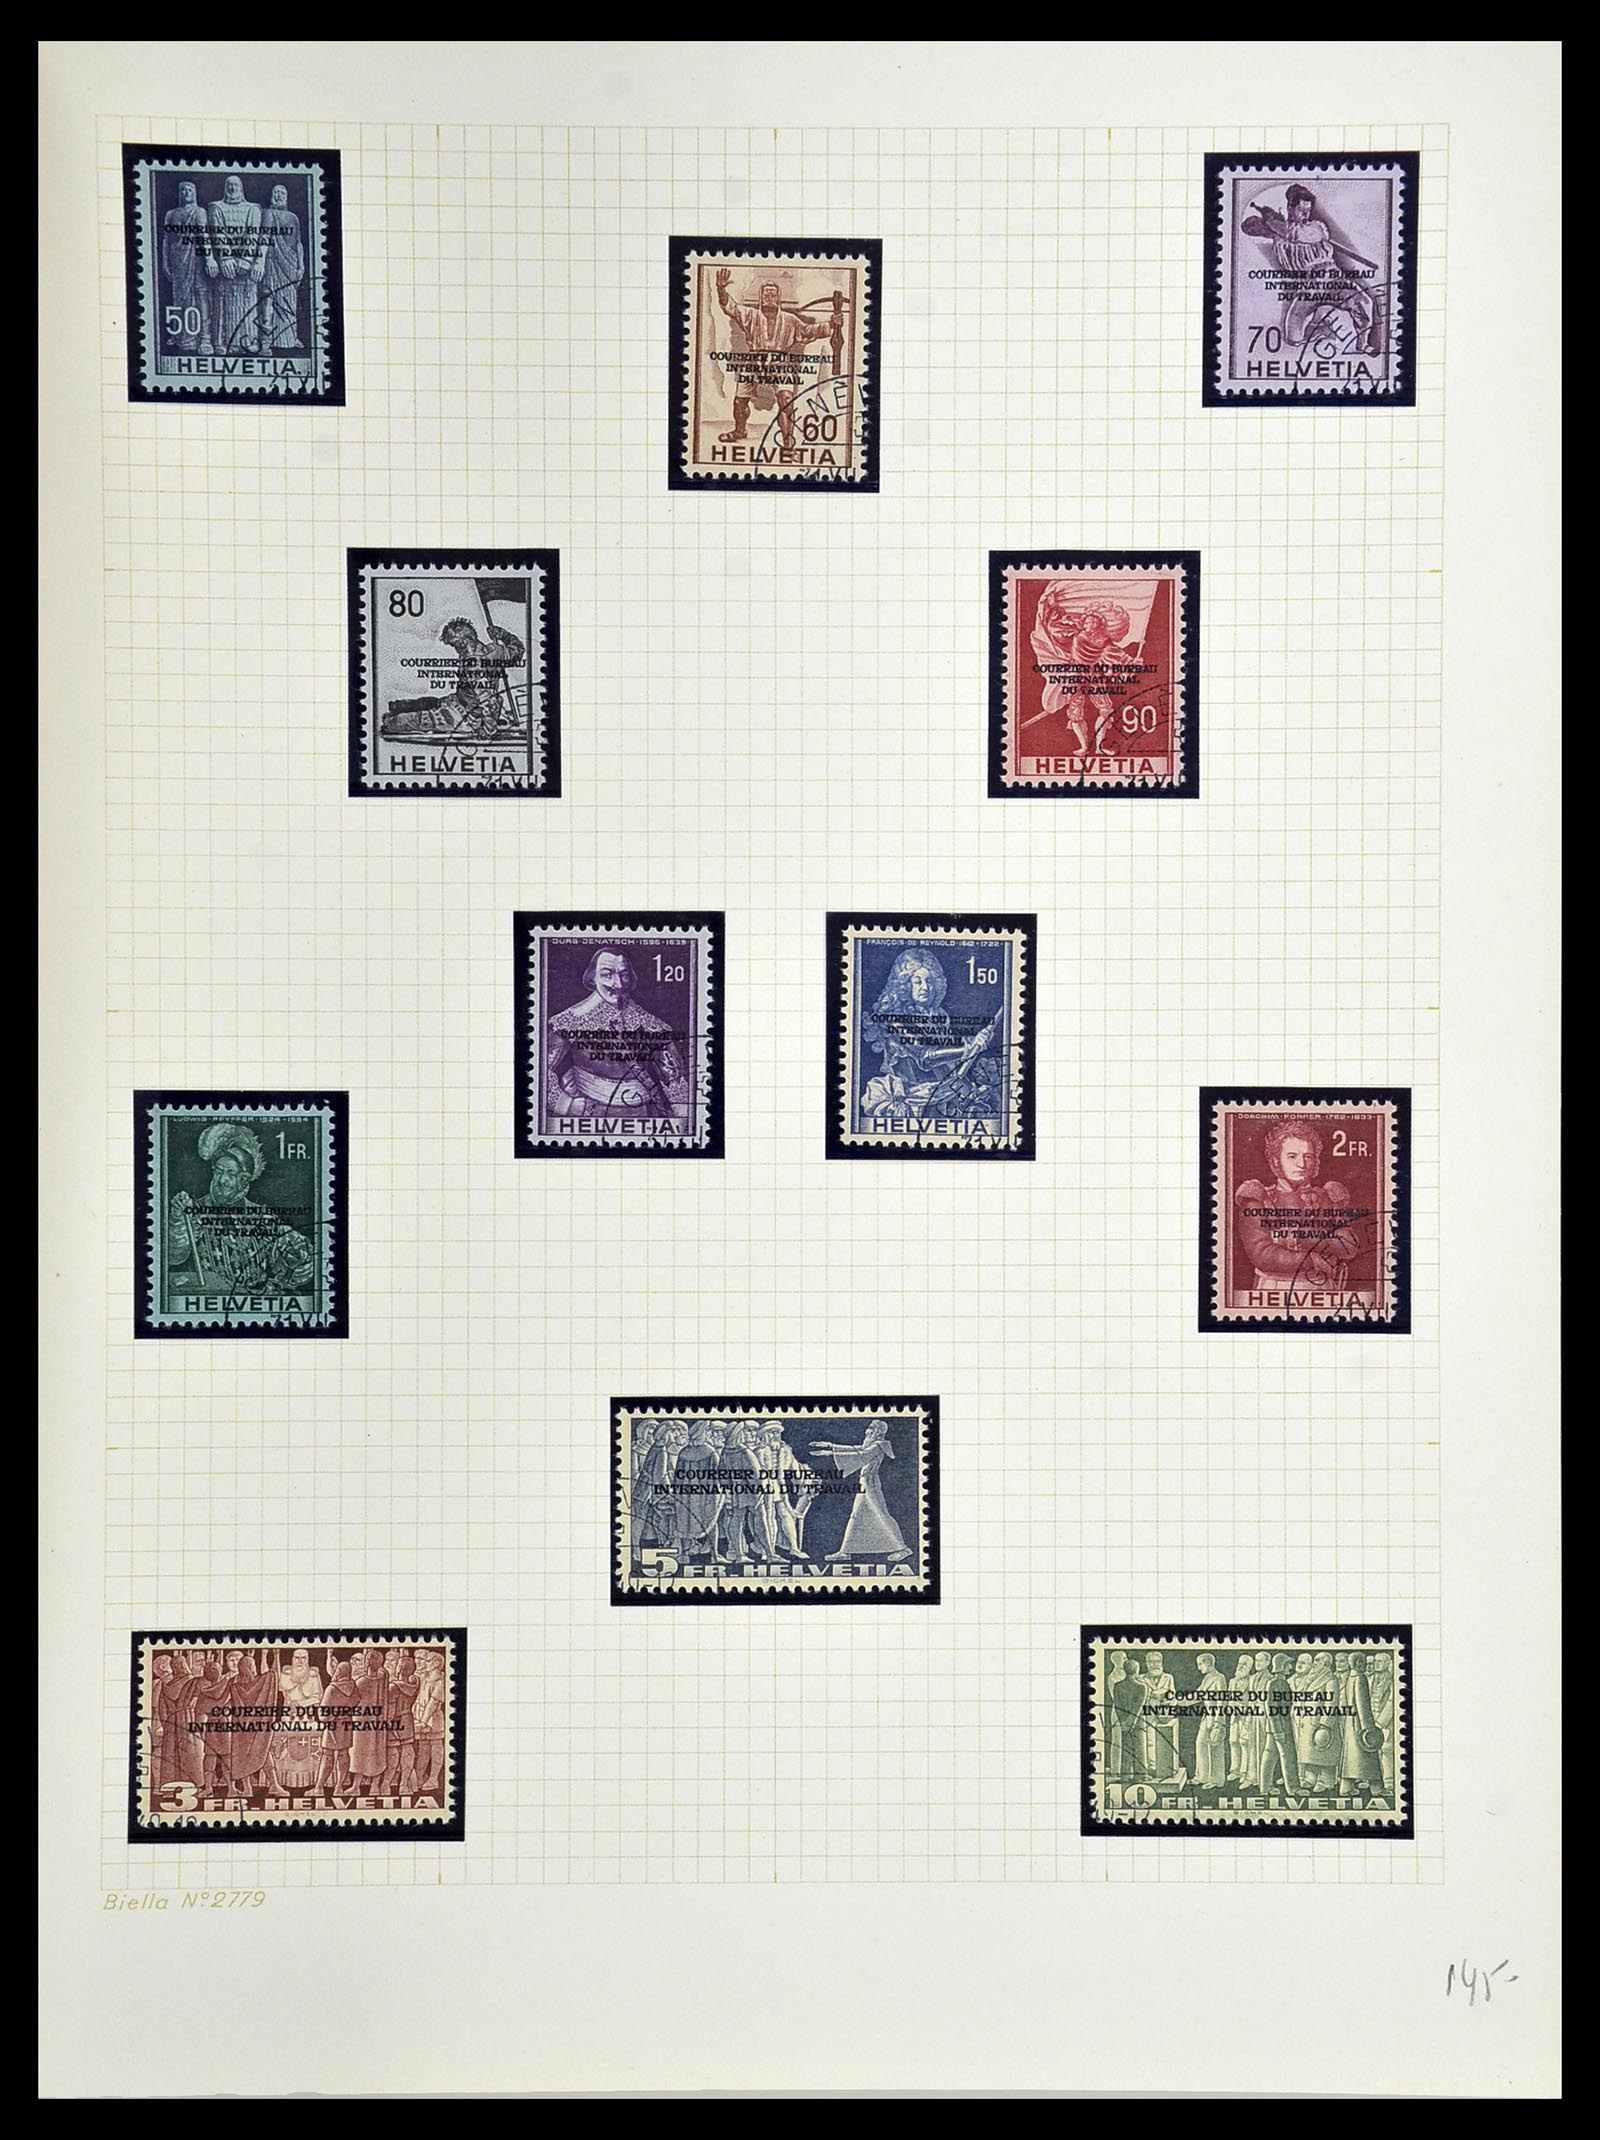 34135 023 - Stamp collection 34135 Switzerland back of the book 1910-1950.